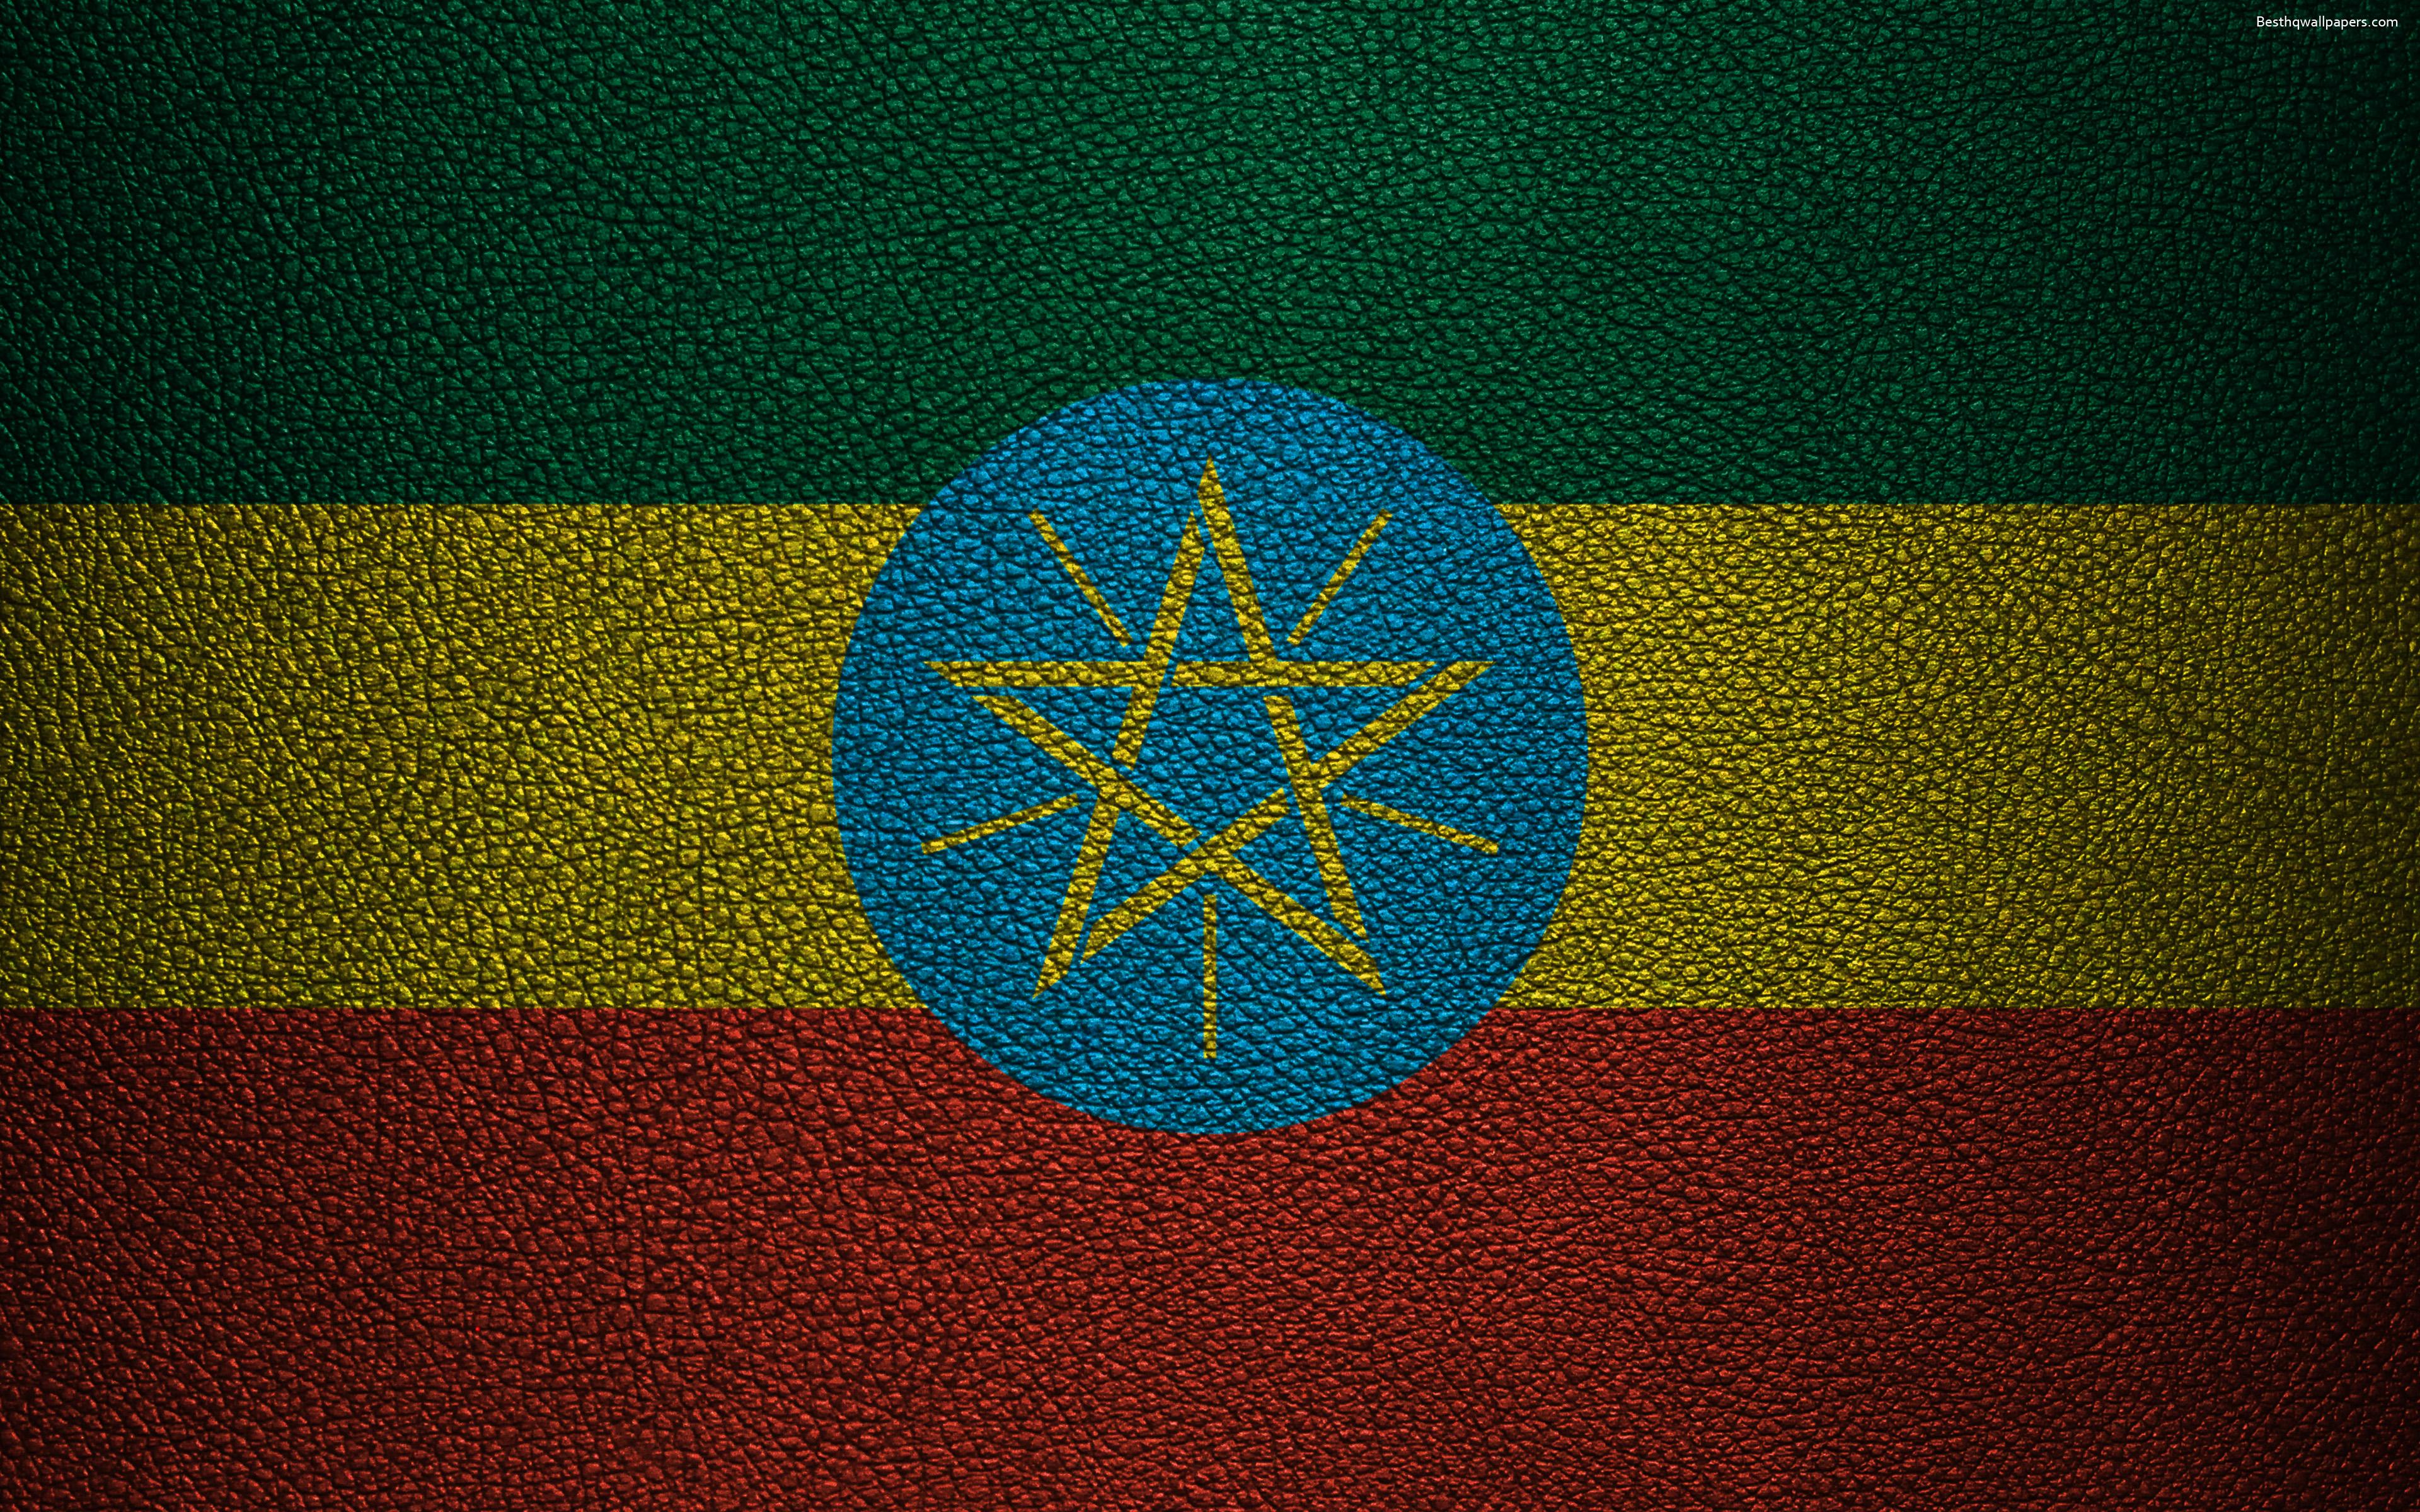 Download wallpaper Flag of Ethiopia, Africa, 4K, leather texture, Ethiopian flag, flags of African countries, Ethiopia for desktop with resolution 3840x2400. High Quality HD picture wallpaper